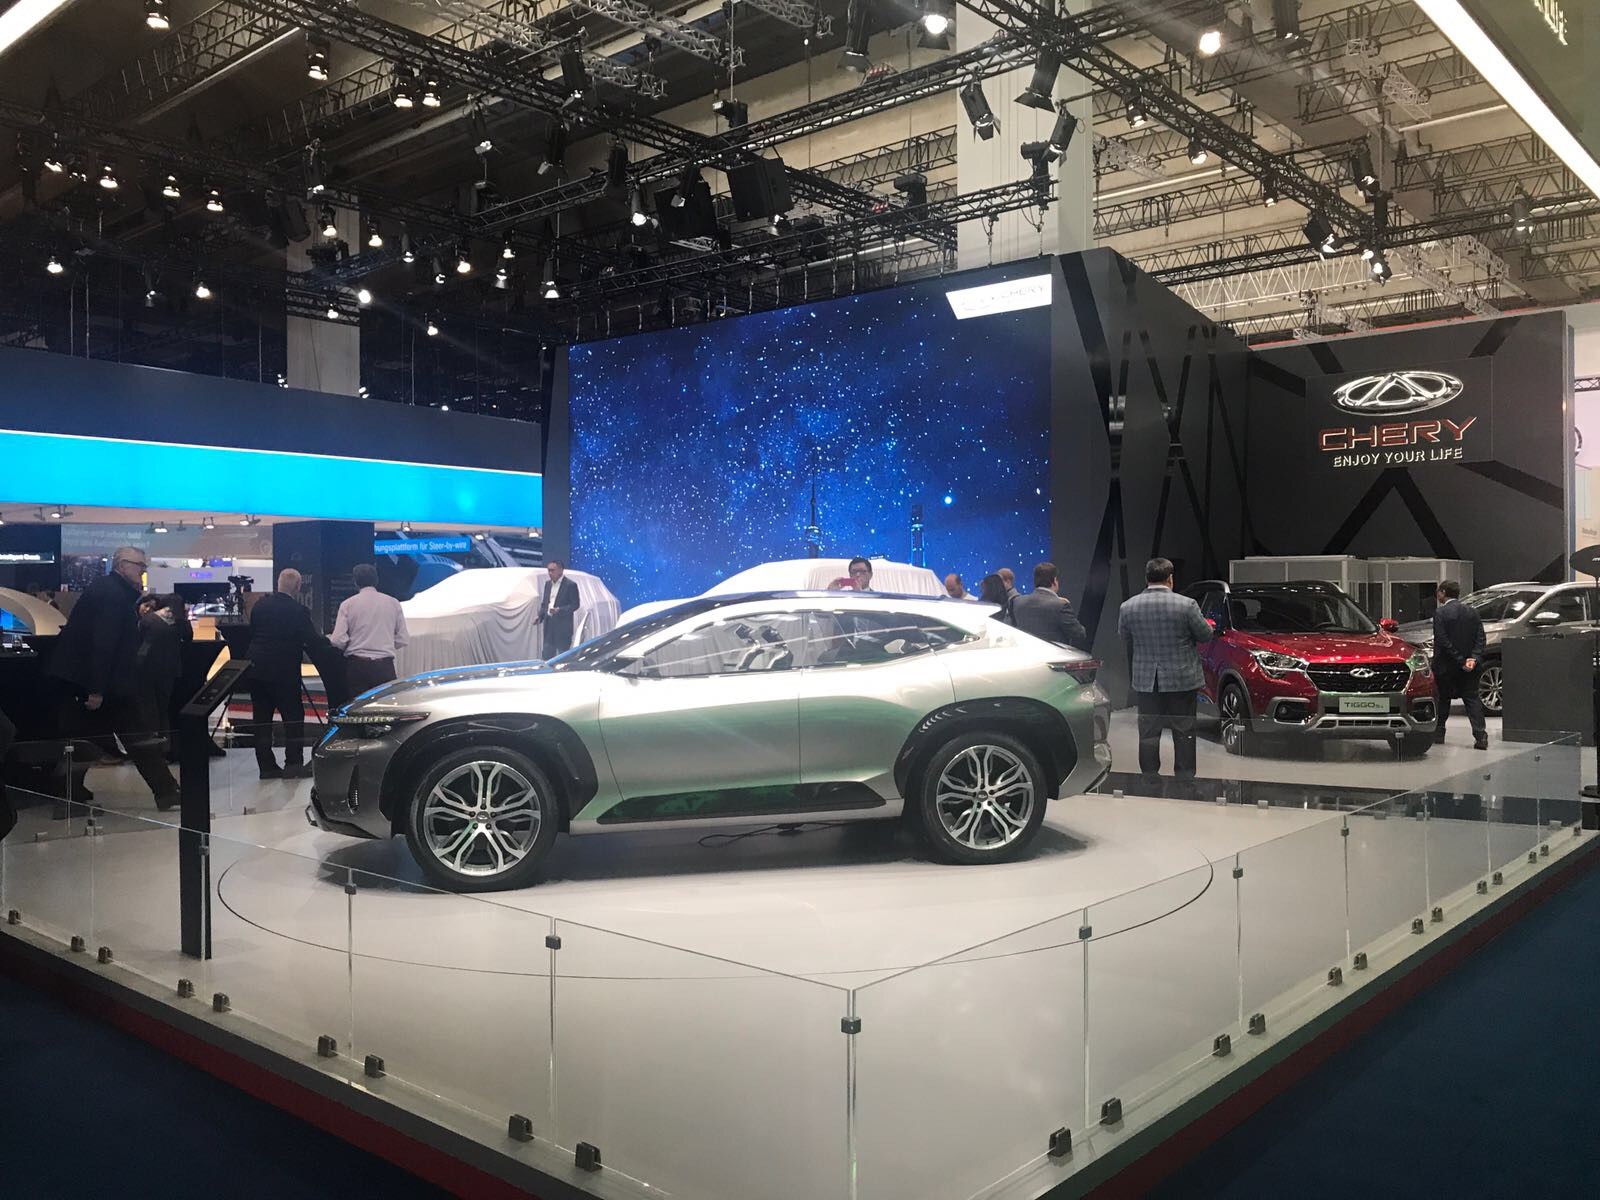 A picture of Chery’s Exeed Tx unveiled at the 2017 IAA in Frankfurt.